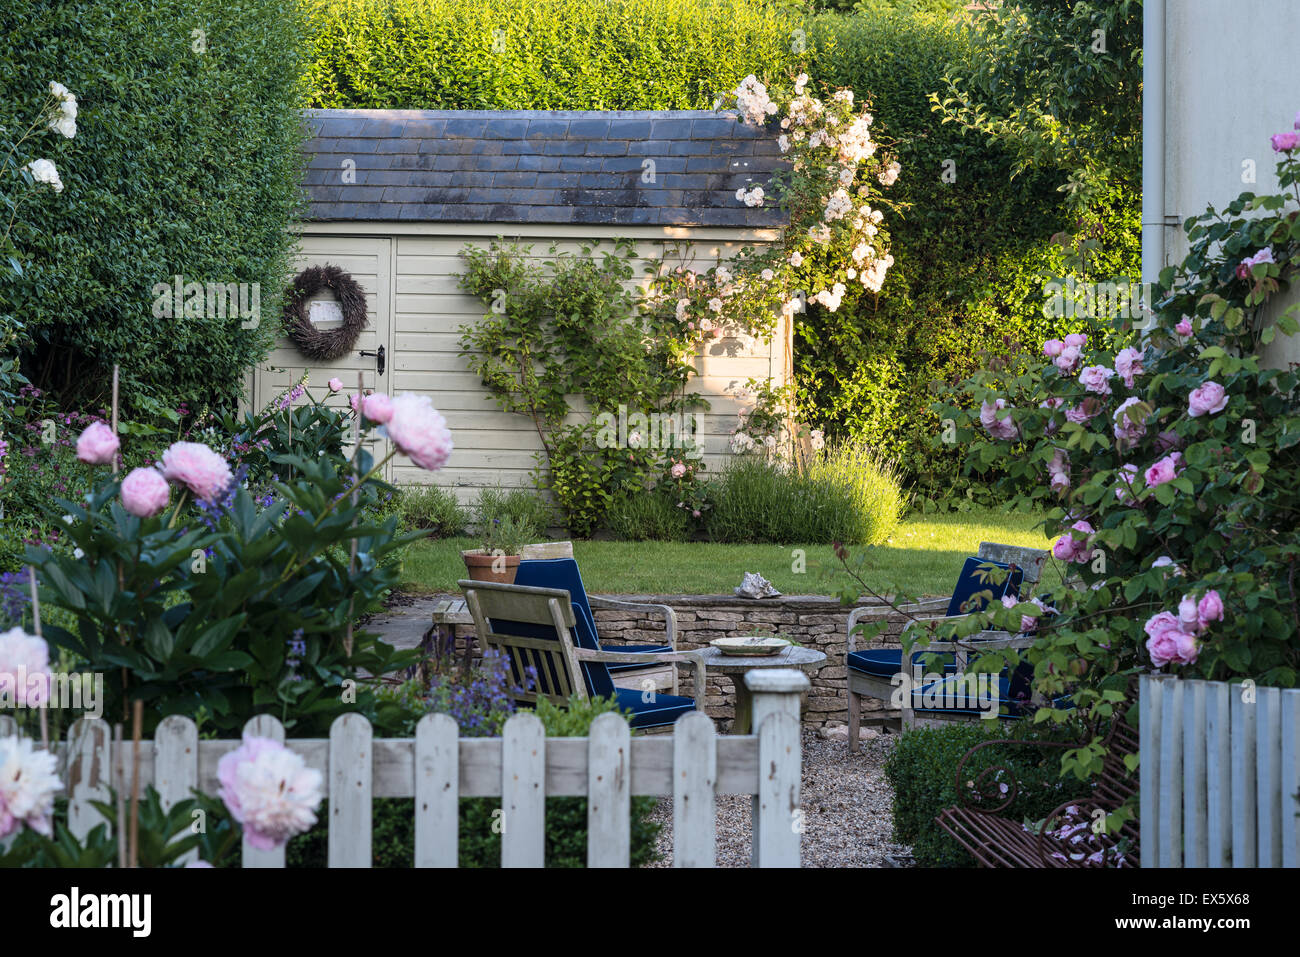 Wooden shed in country garden with peonies and roses Stock Photo